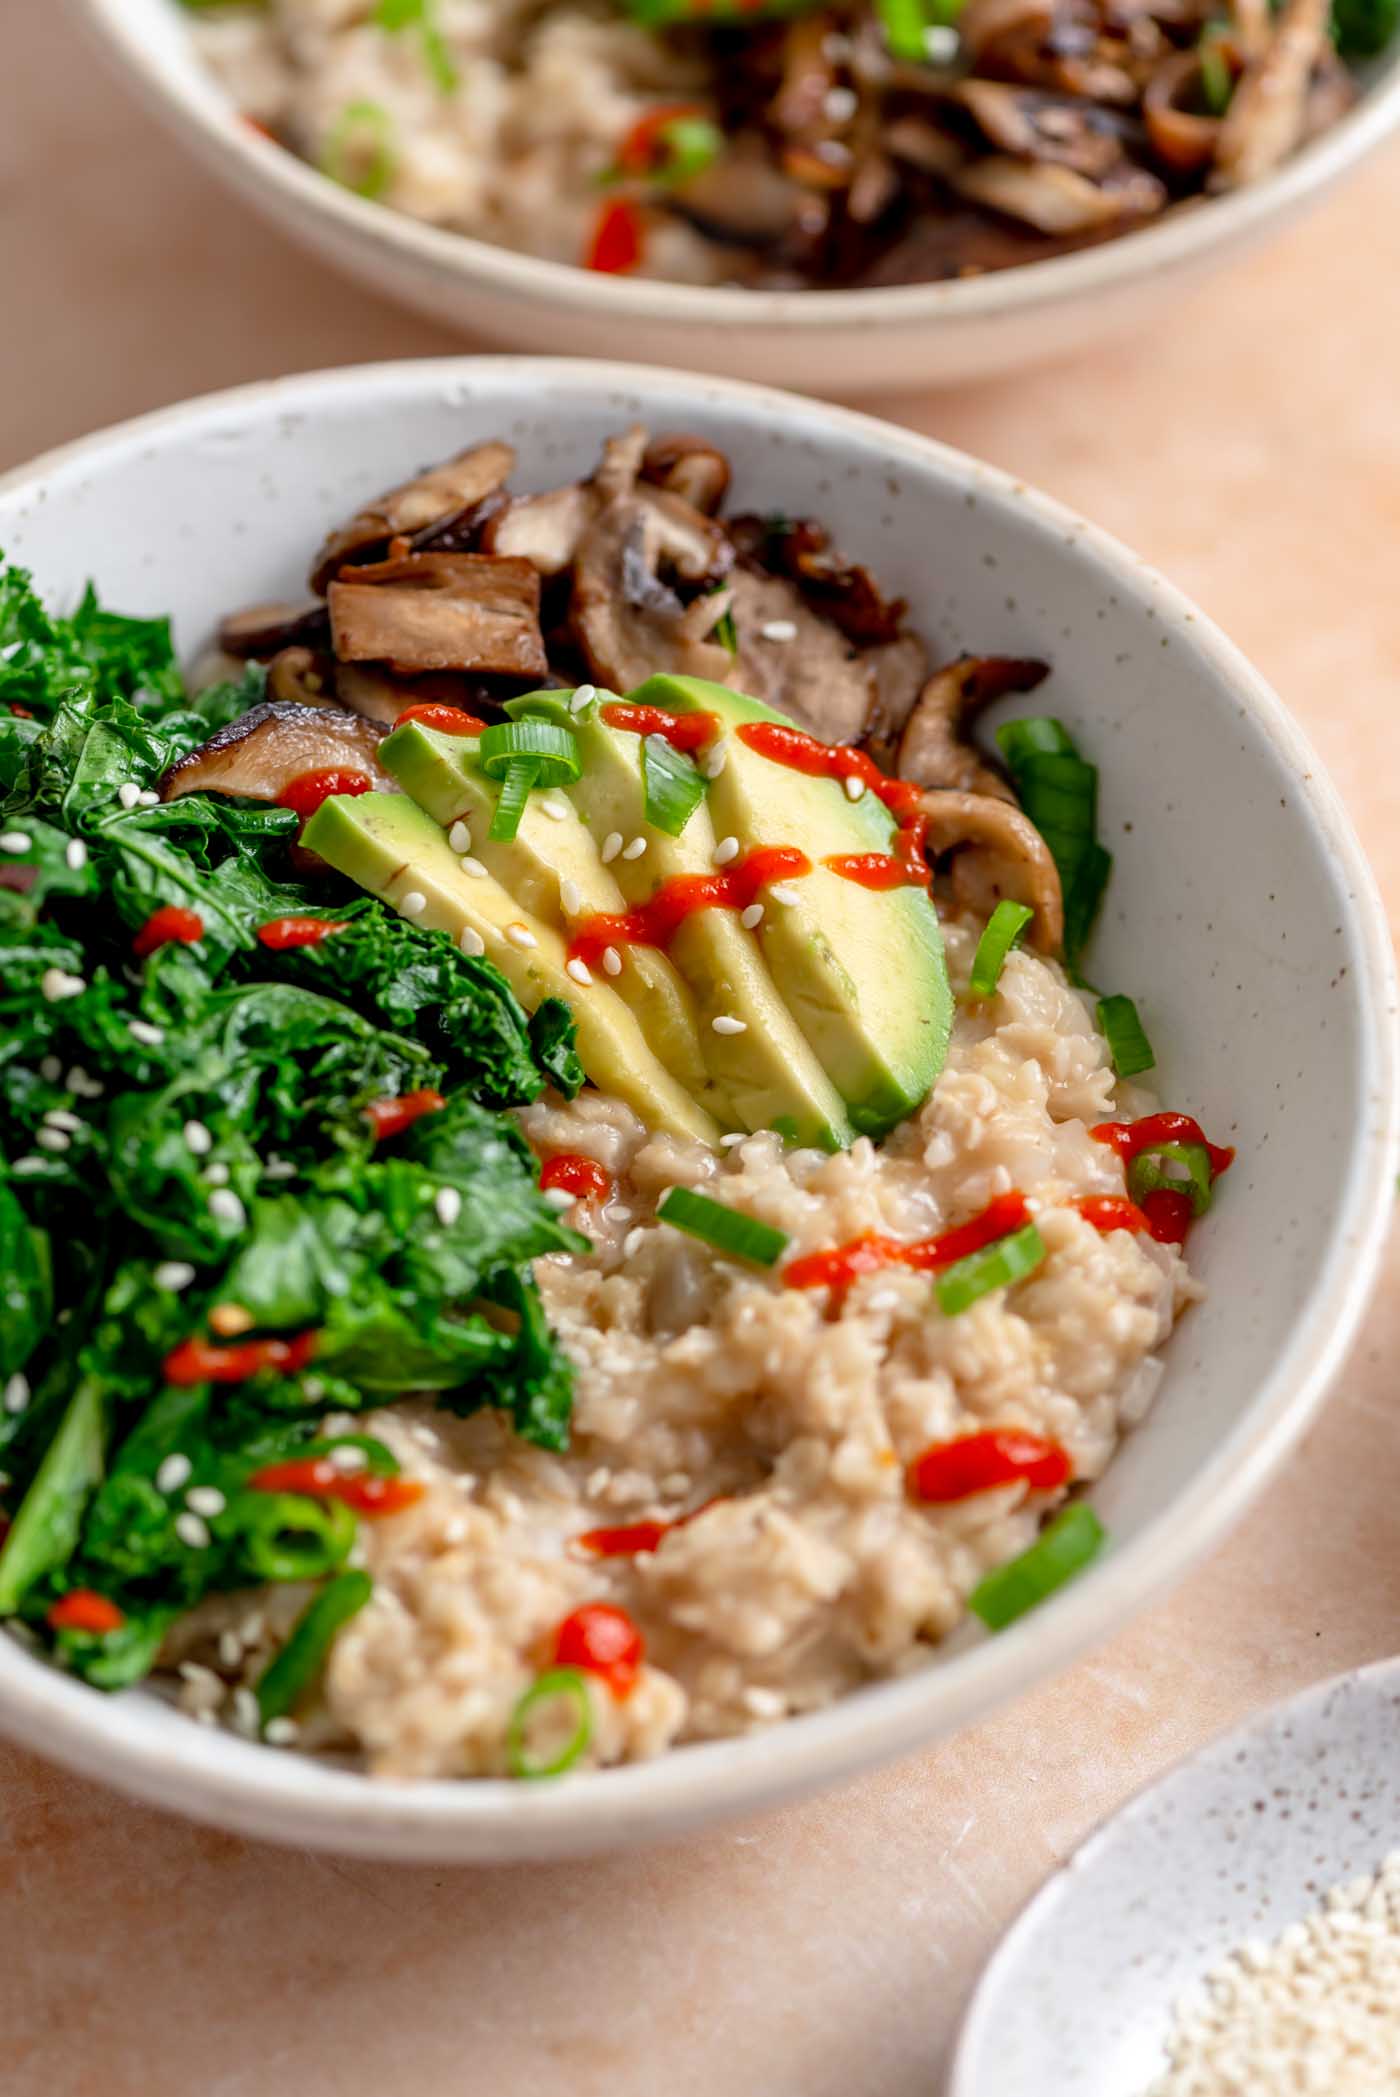 Bowl of savory oatmeal topped with avocado slices, cooked kale and mushroom and some hot sauce.